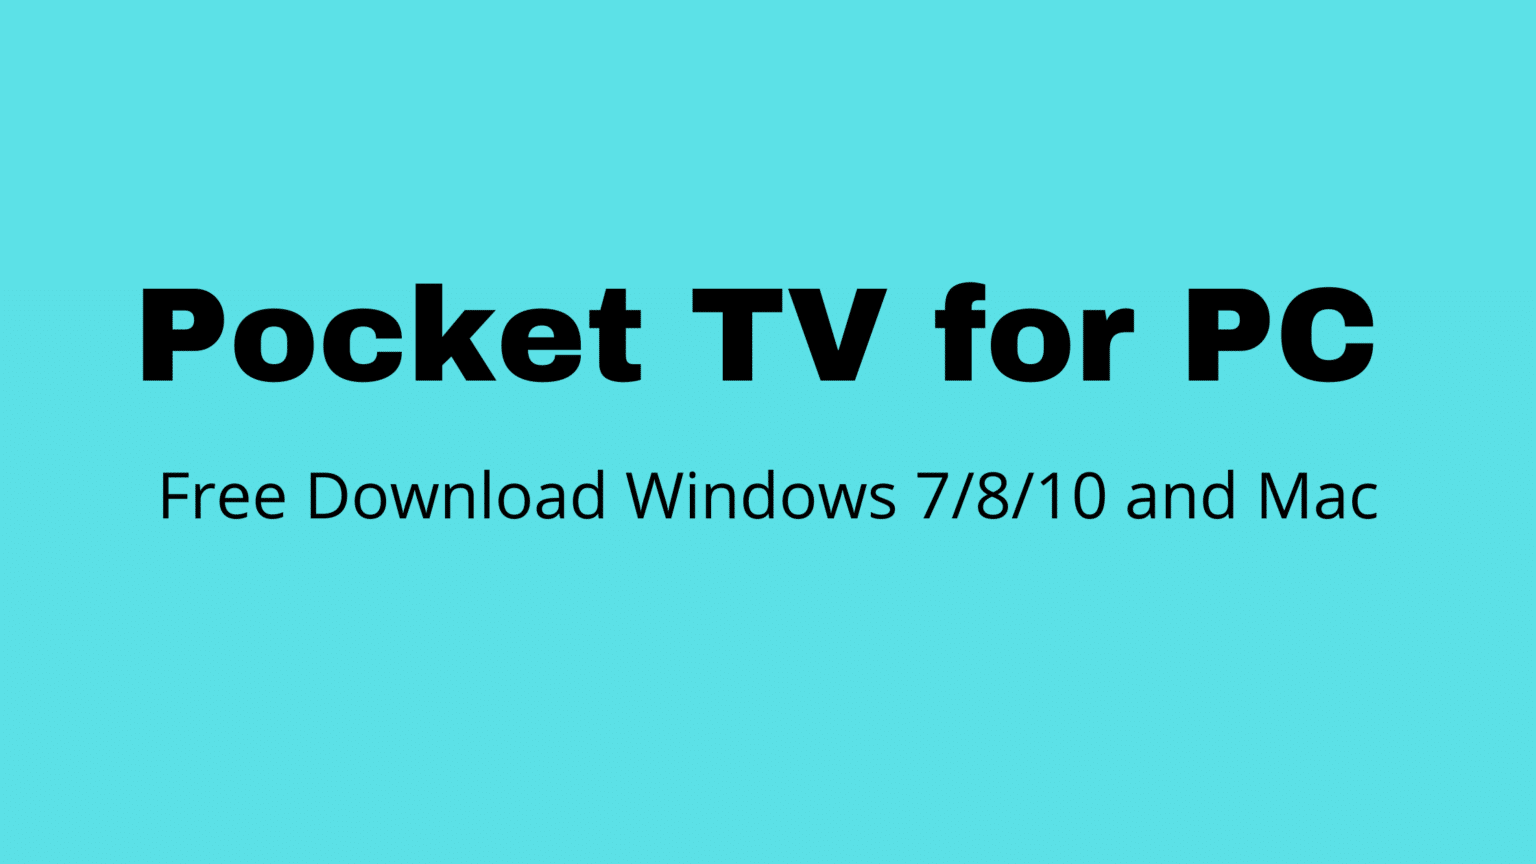 Pocket TV For PC 1536x864 